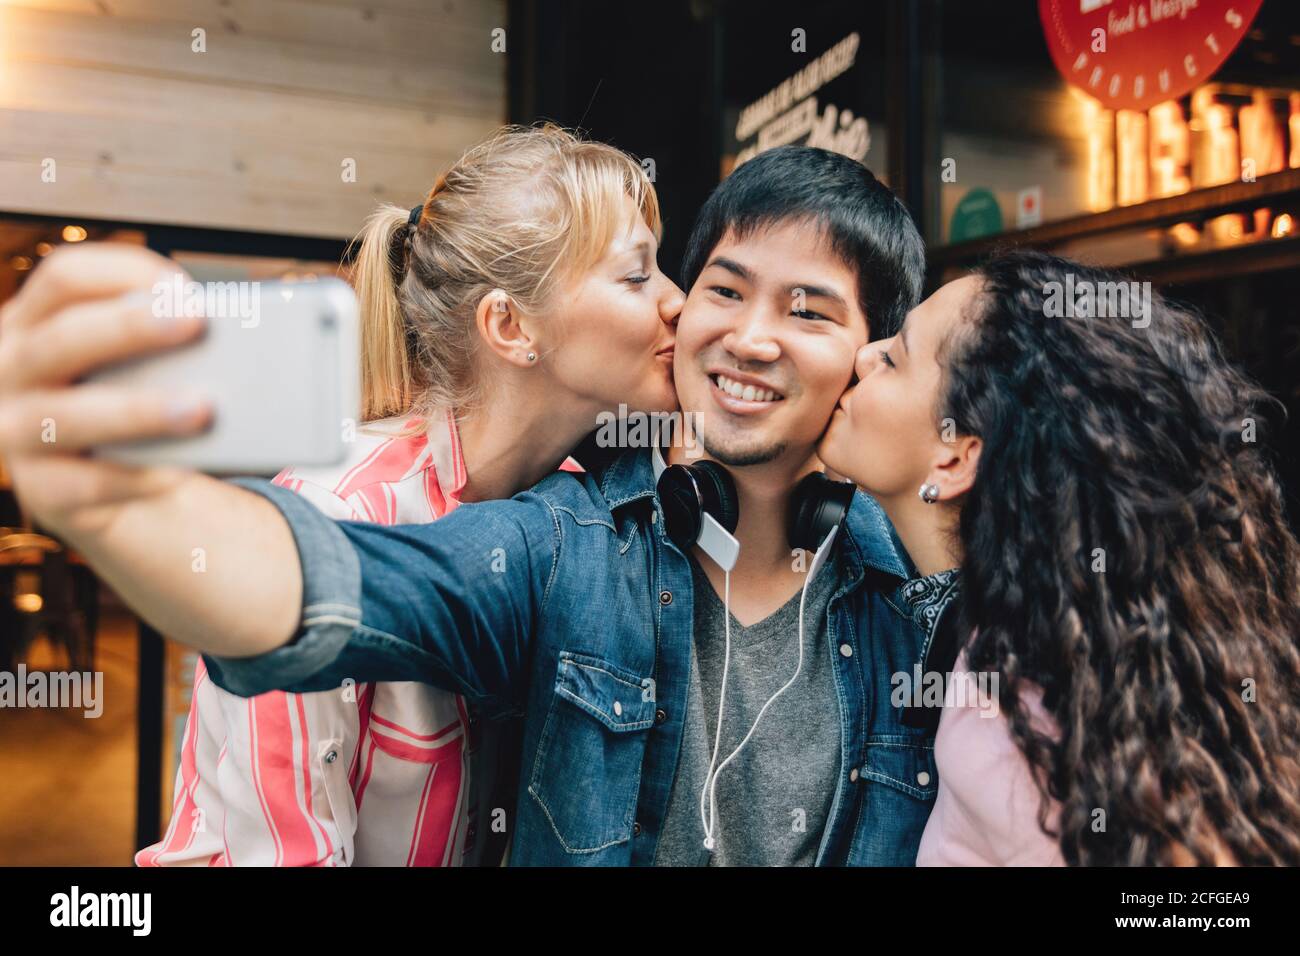 girls kissing a young man taking a selfie Stock Photo